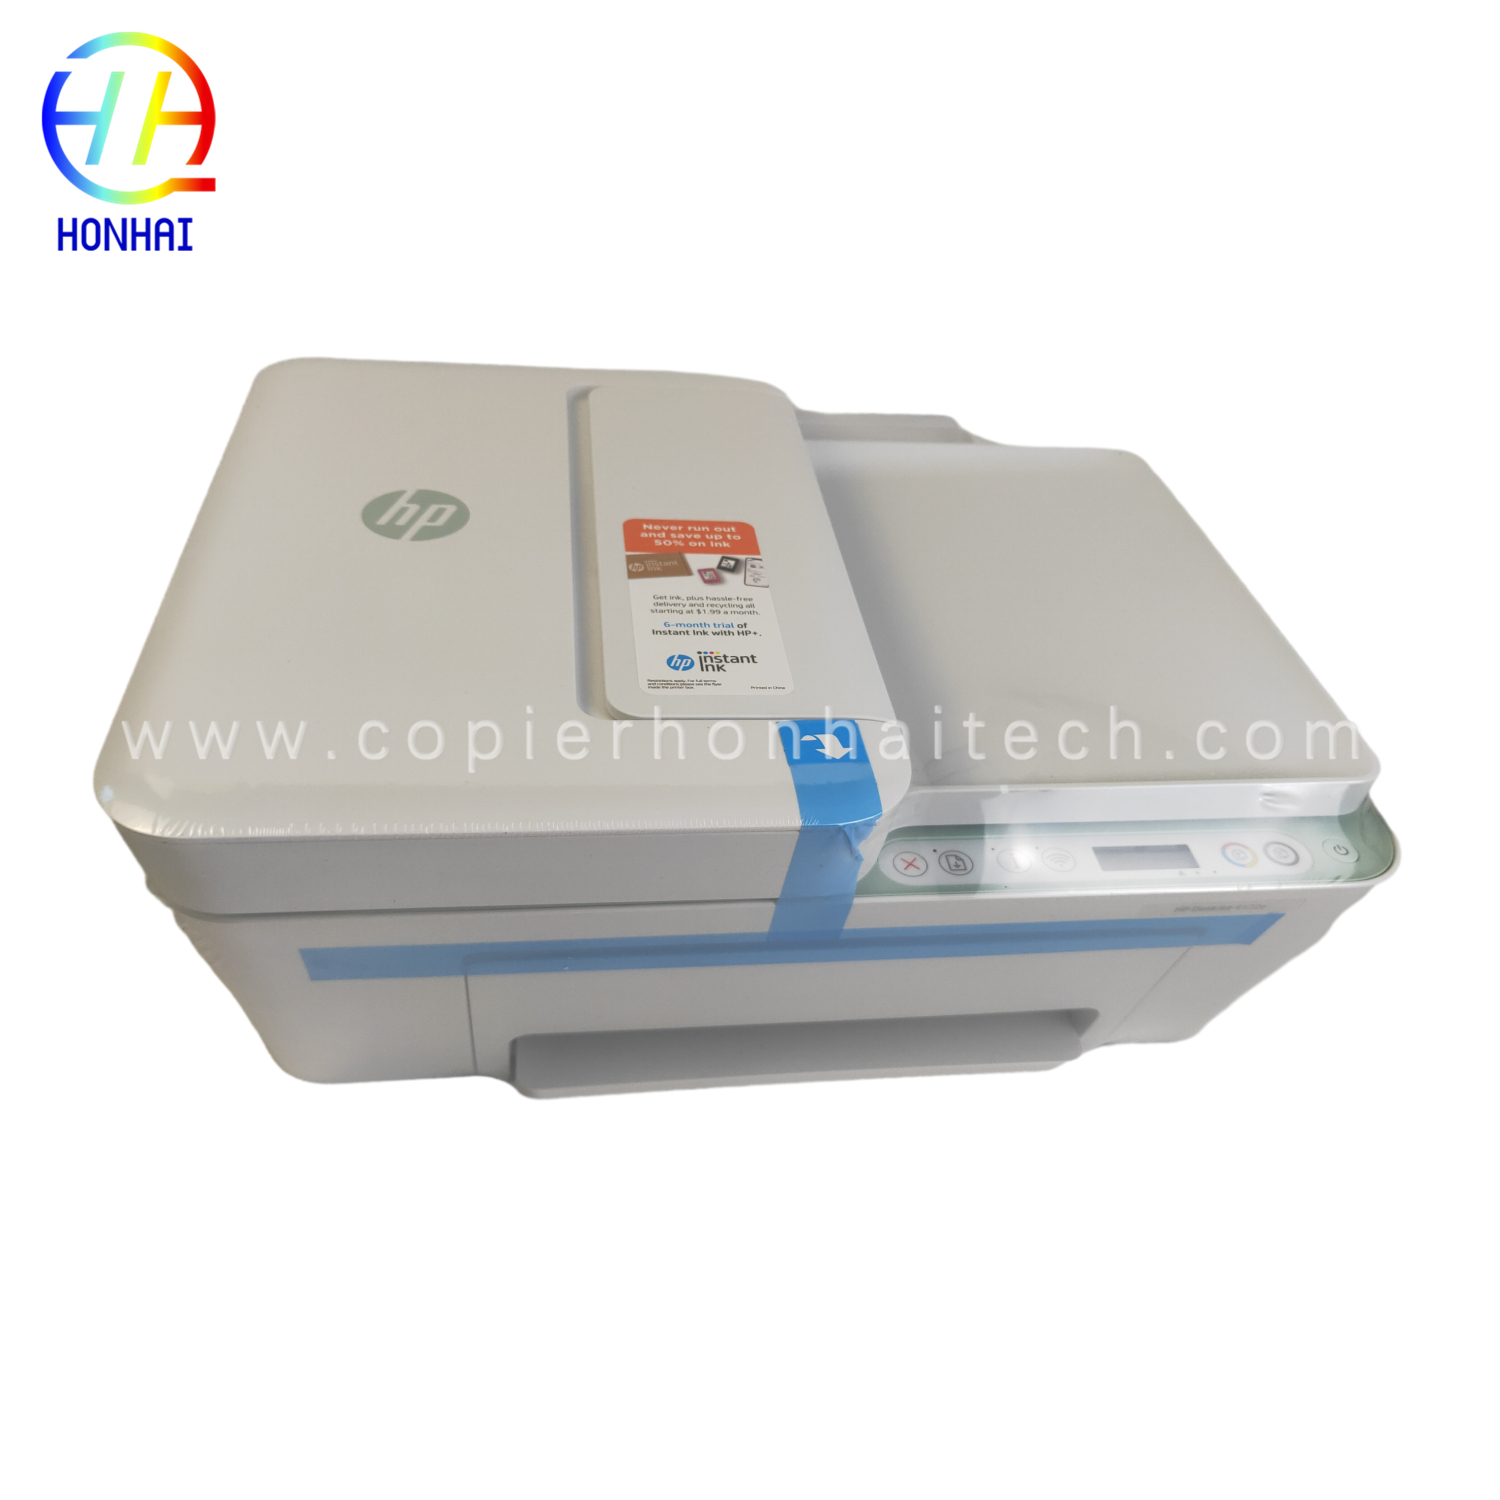 https://www.copierhonhaitech.com/original-new-wireless-printer-for-hp-deskjet-4122e-all-in-one-printer-scan-and-copy-home-office-students-and-home- پرنٽر-26q96a-پراڊڪٽ/